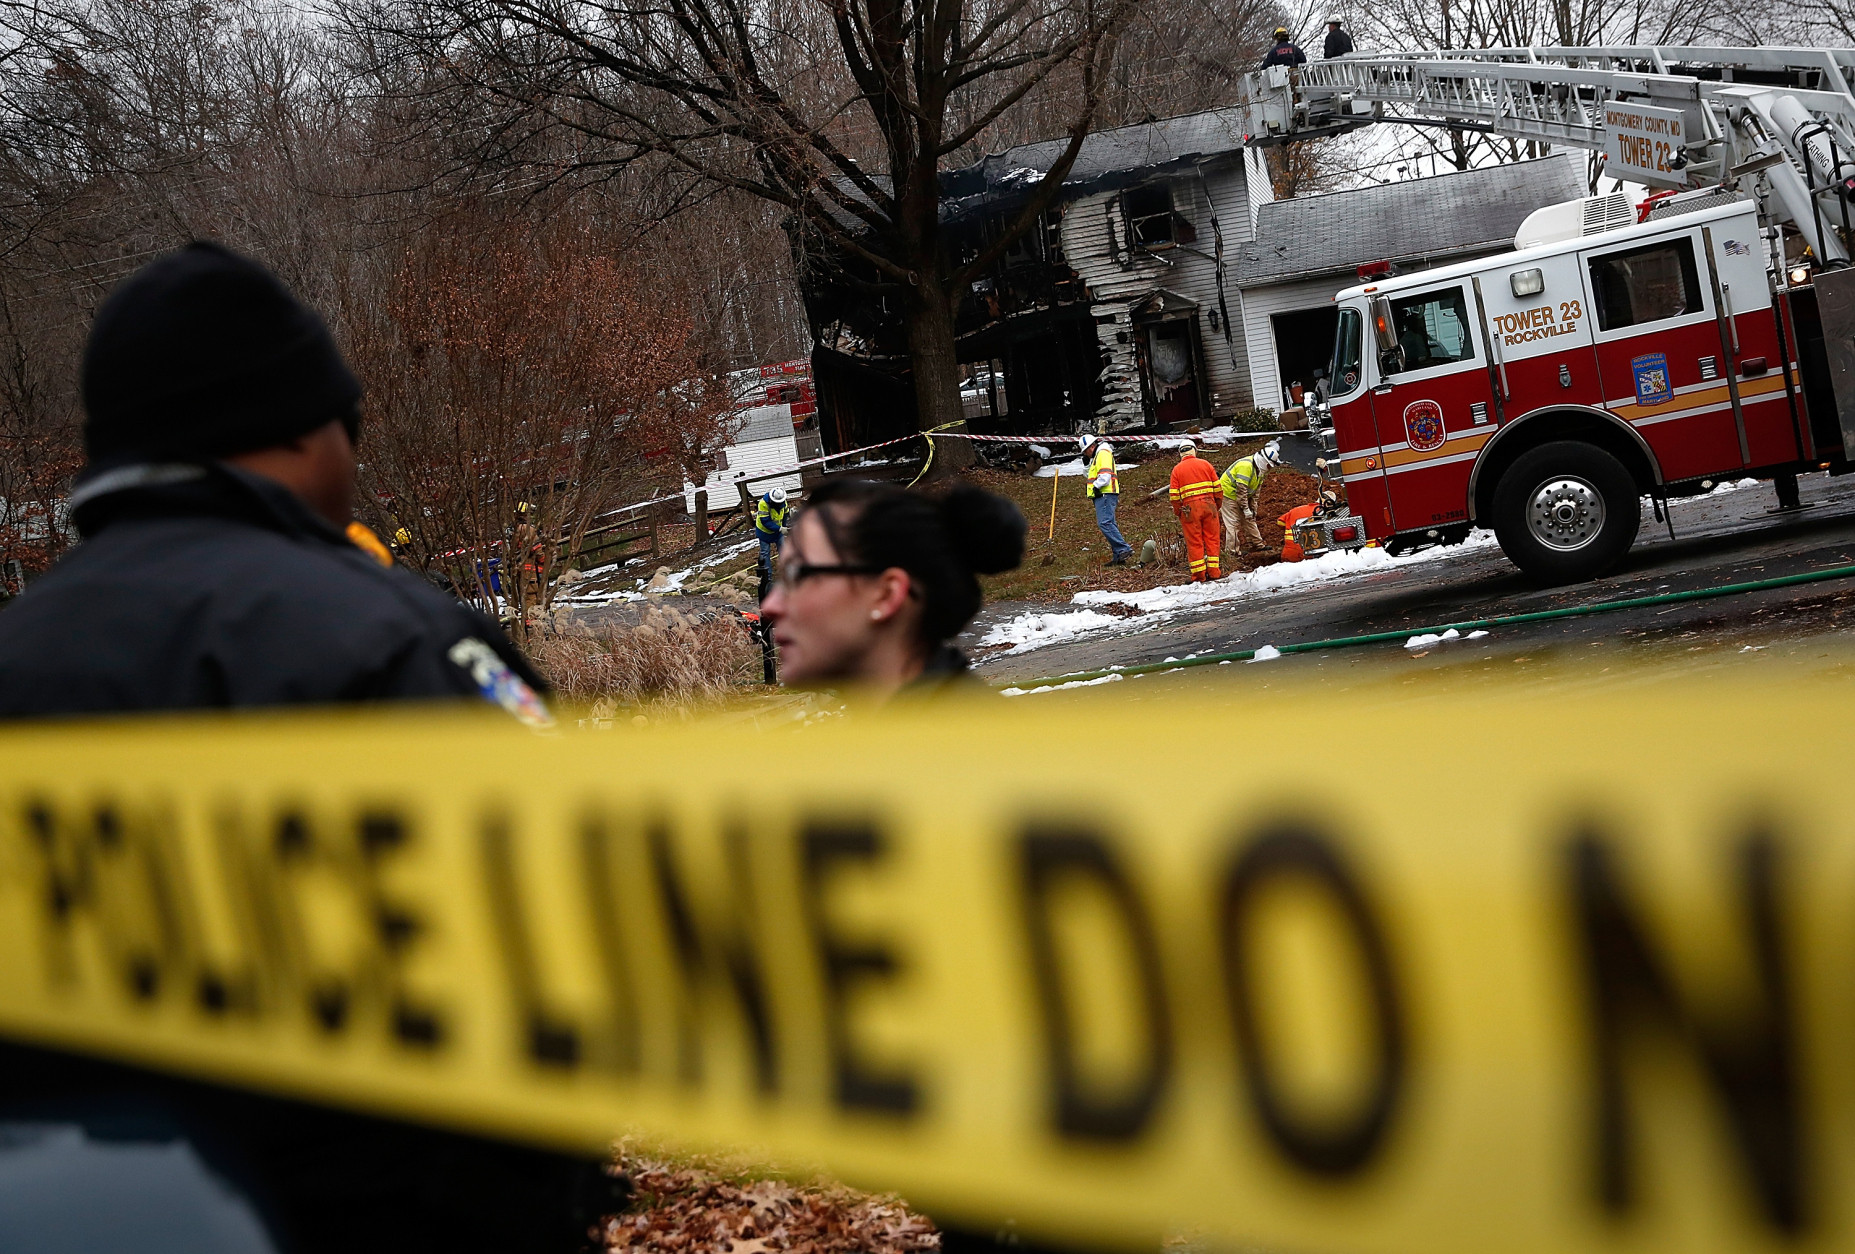 GAITHERSBURG, MD - DECEMBER 08:  Utility workers and emergency personnel work near the site where a small plane crashed into a residential neighborhood December 8, 2014 in Gaithersburg, Maryland. The three occupants of the plane were killed in the crash, and investigators are searching for three people who are unaccounted for on the ground.  (Photo by Win McNamee/Getty Images)